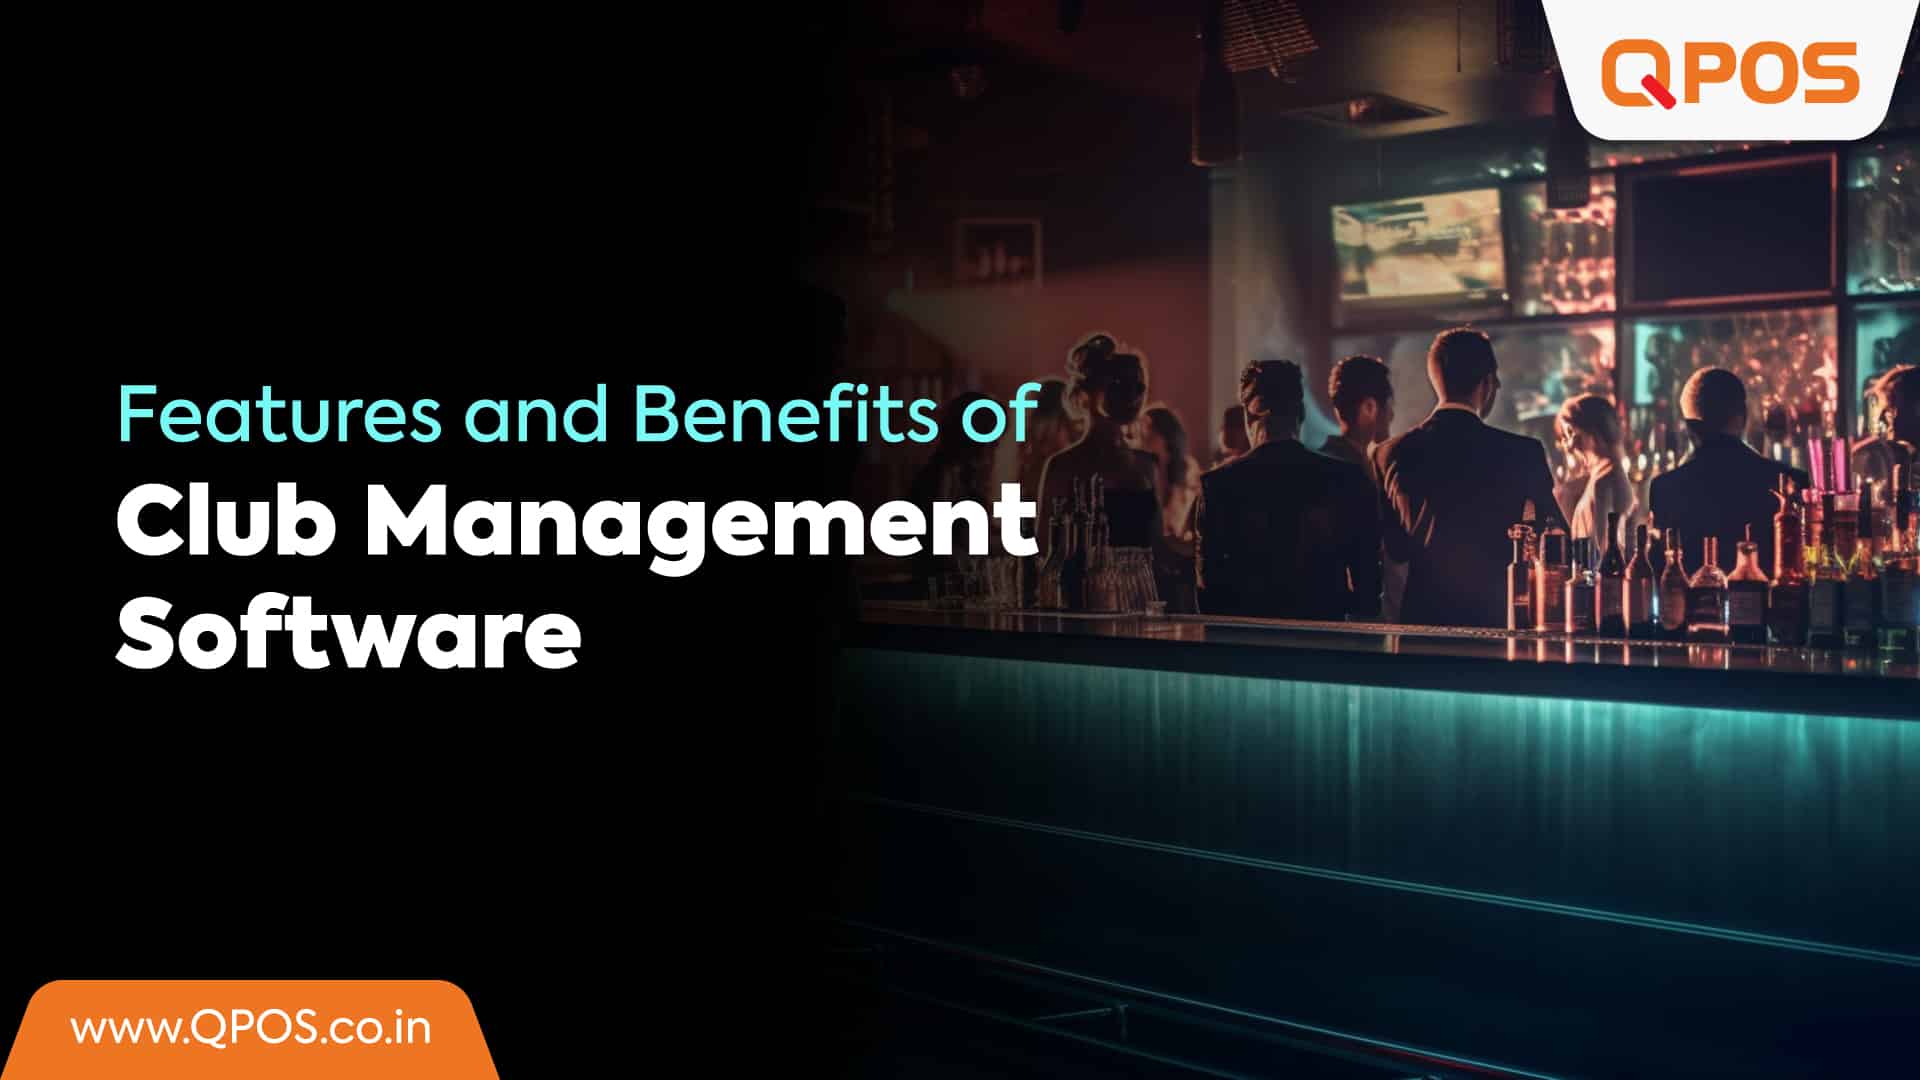 Features and Benefits of Club Management Software